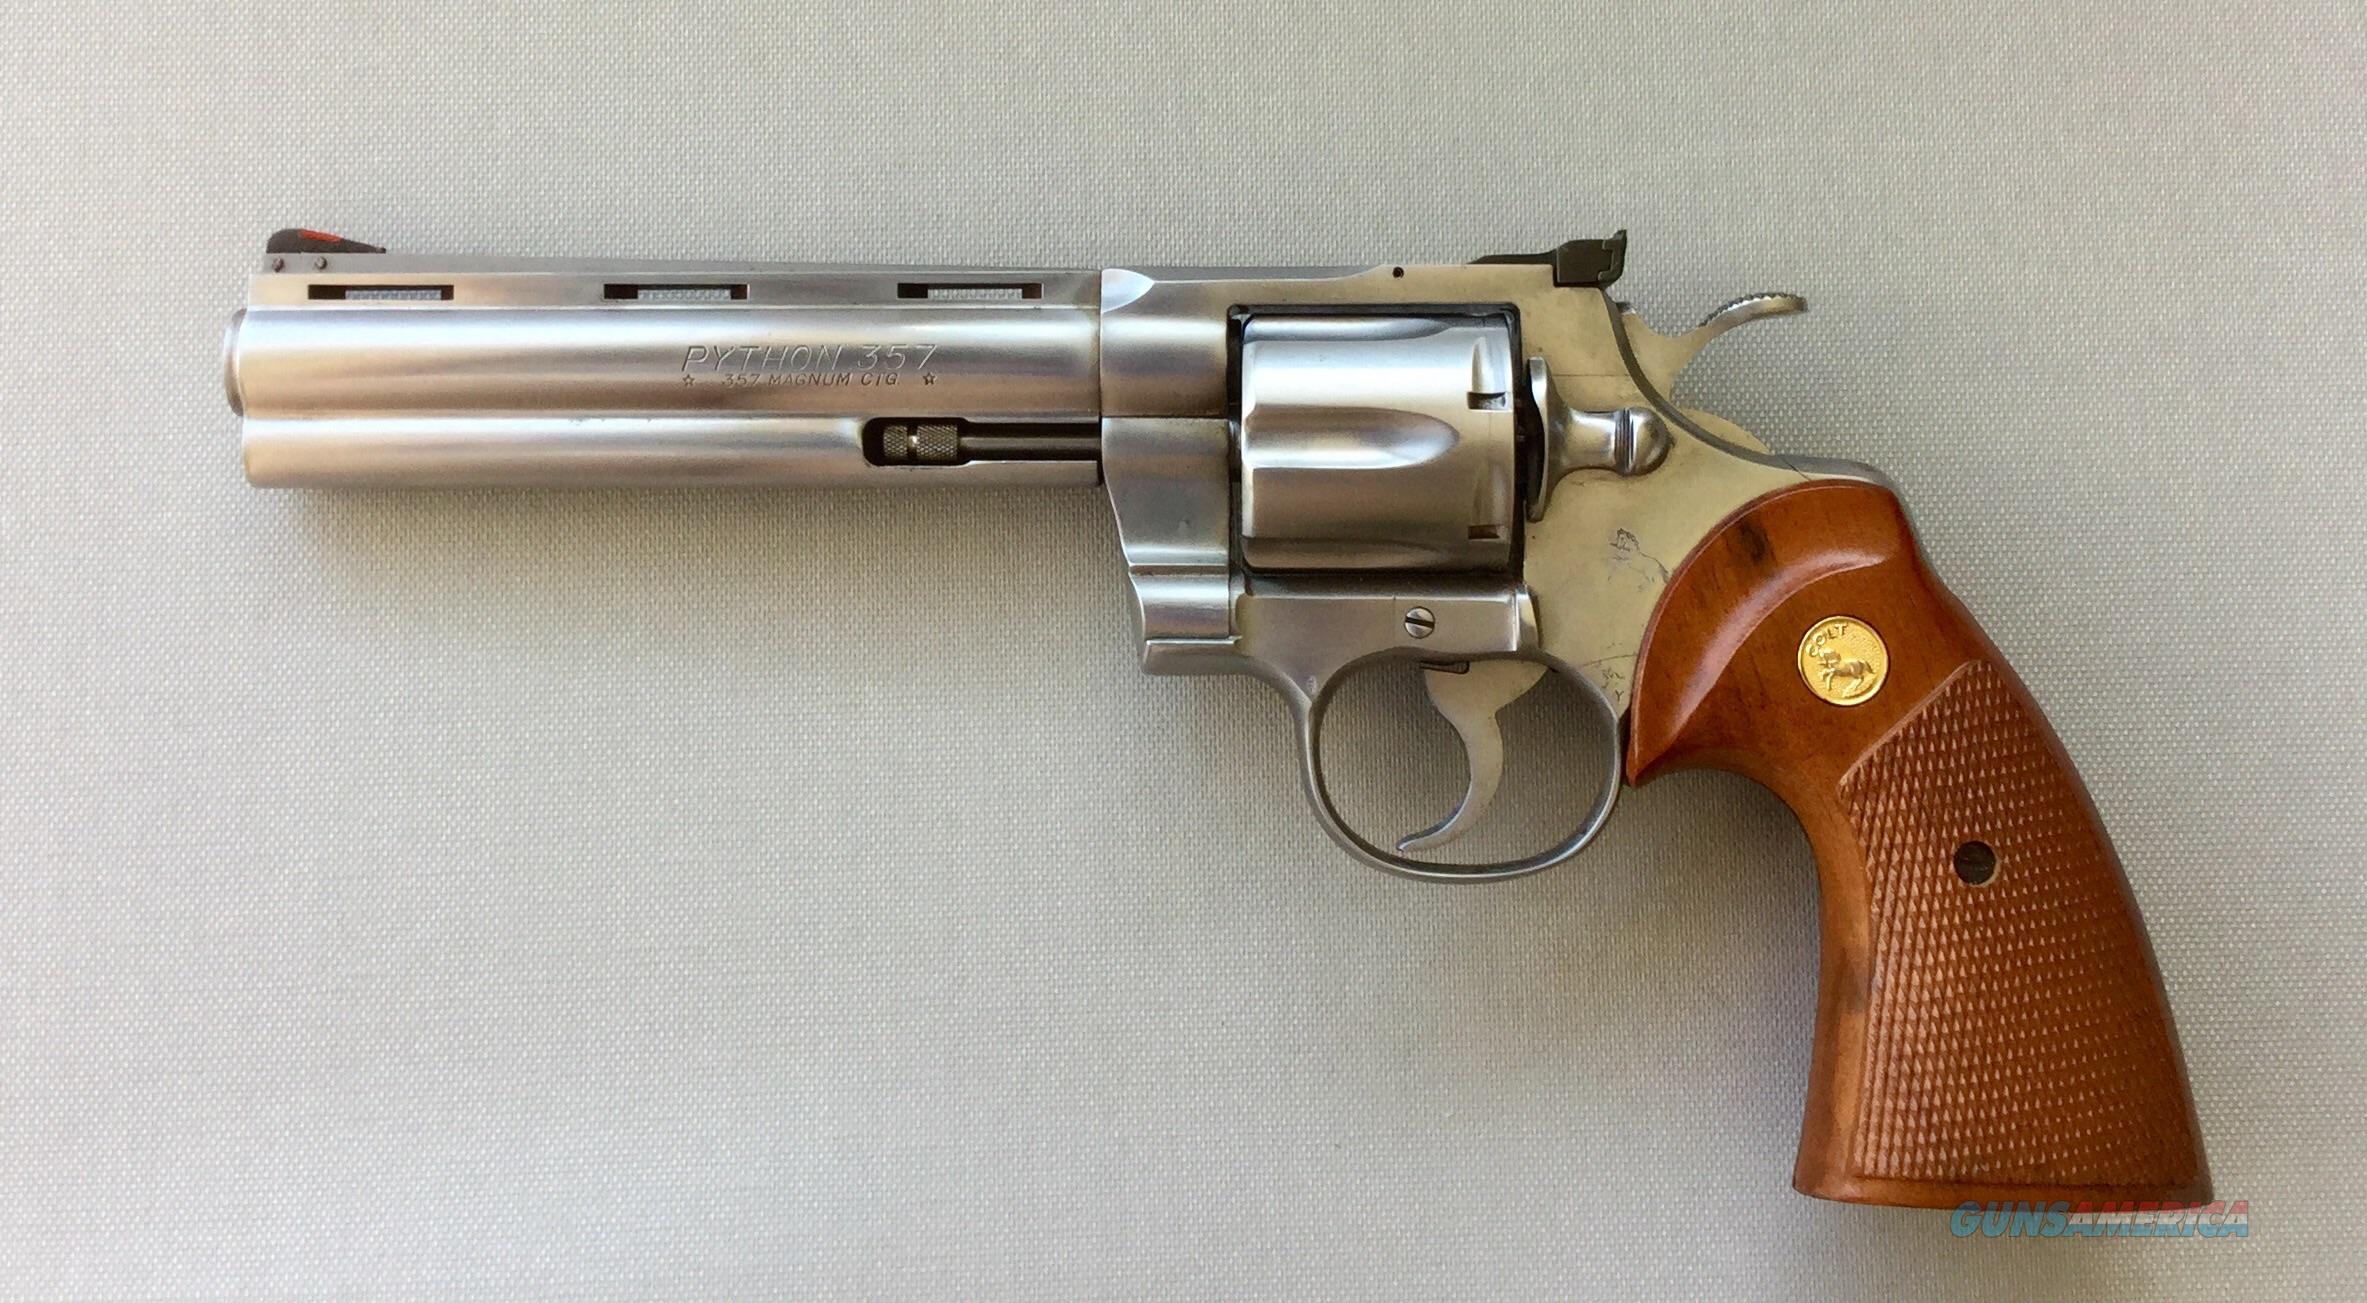 Colt Python Stainless Steel 6 Inch Barrel 357 M For Sale 1466